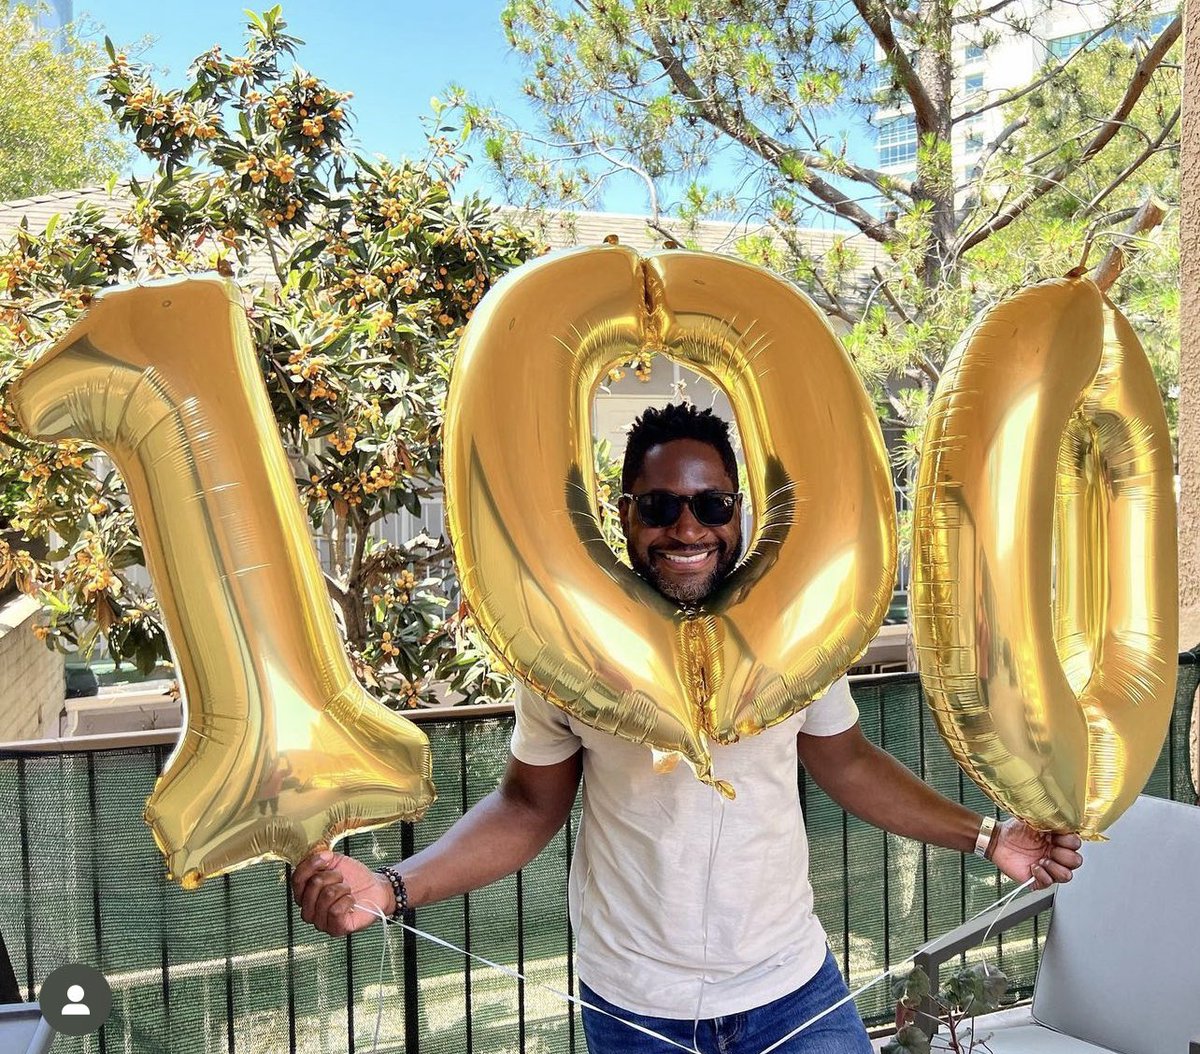 Can y’all please stop what you’re doing and get on your feet to applaud my prolific little bro @UREssien on publishing his ONE HUNDREDTH academic paper?! Such a huge accomplishment that deserves a celebration! Keep shining, Dr. Essien! So proud of you!👊🏽🤴🏾 #pharmacoequity